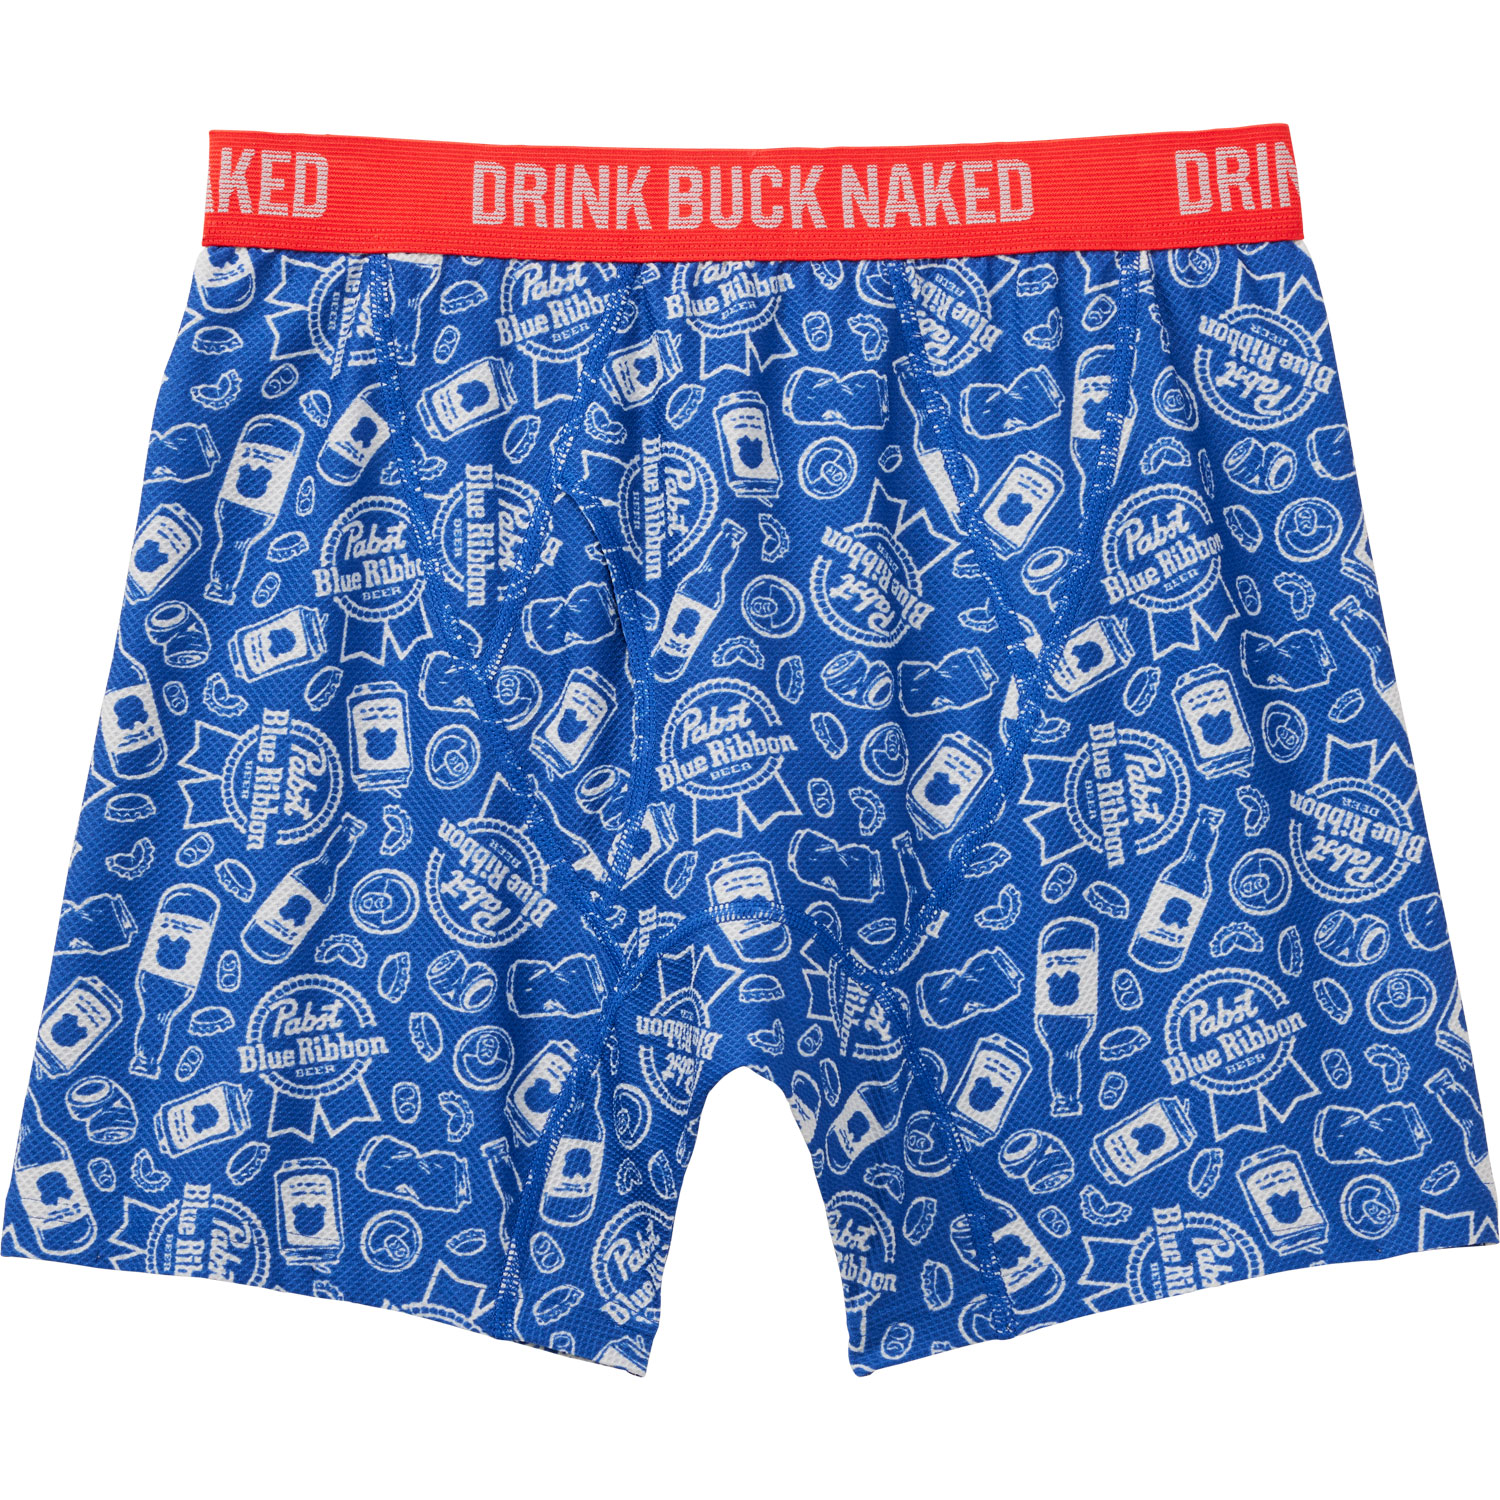 1 Pair Duluth Trading Co Buck Naked Boxer Briefs Kingfisher Blue 76015 2X 3X